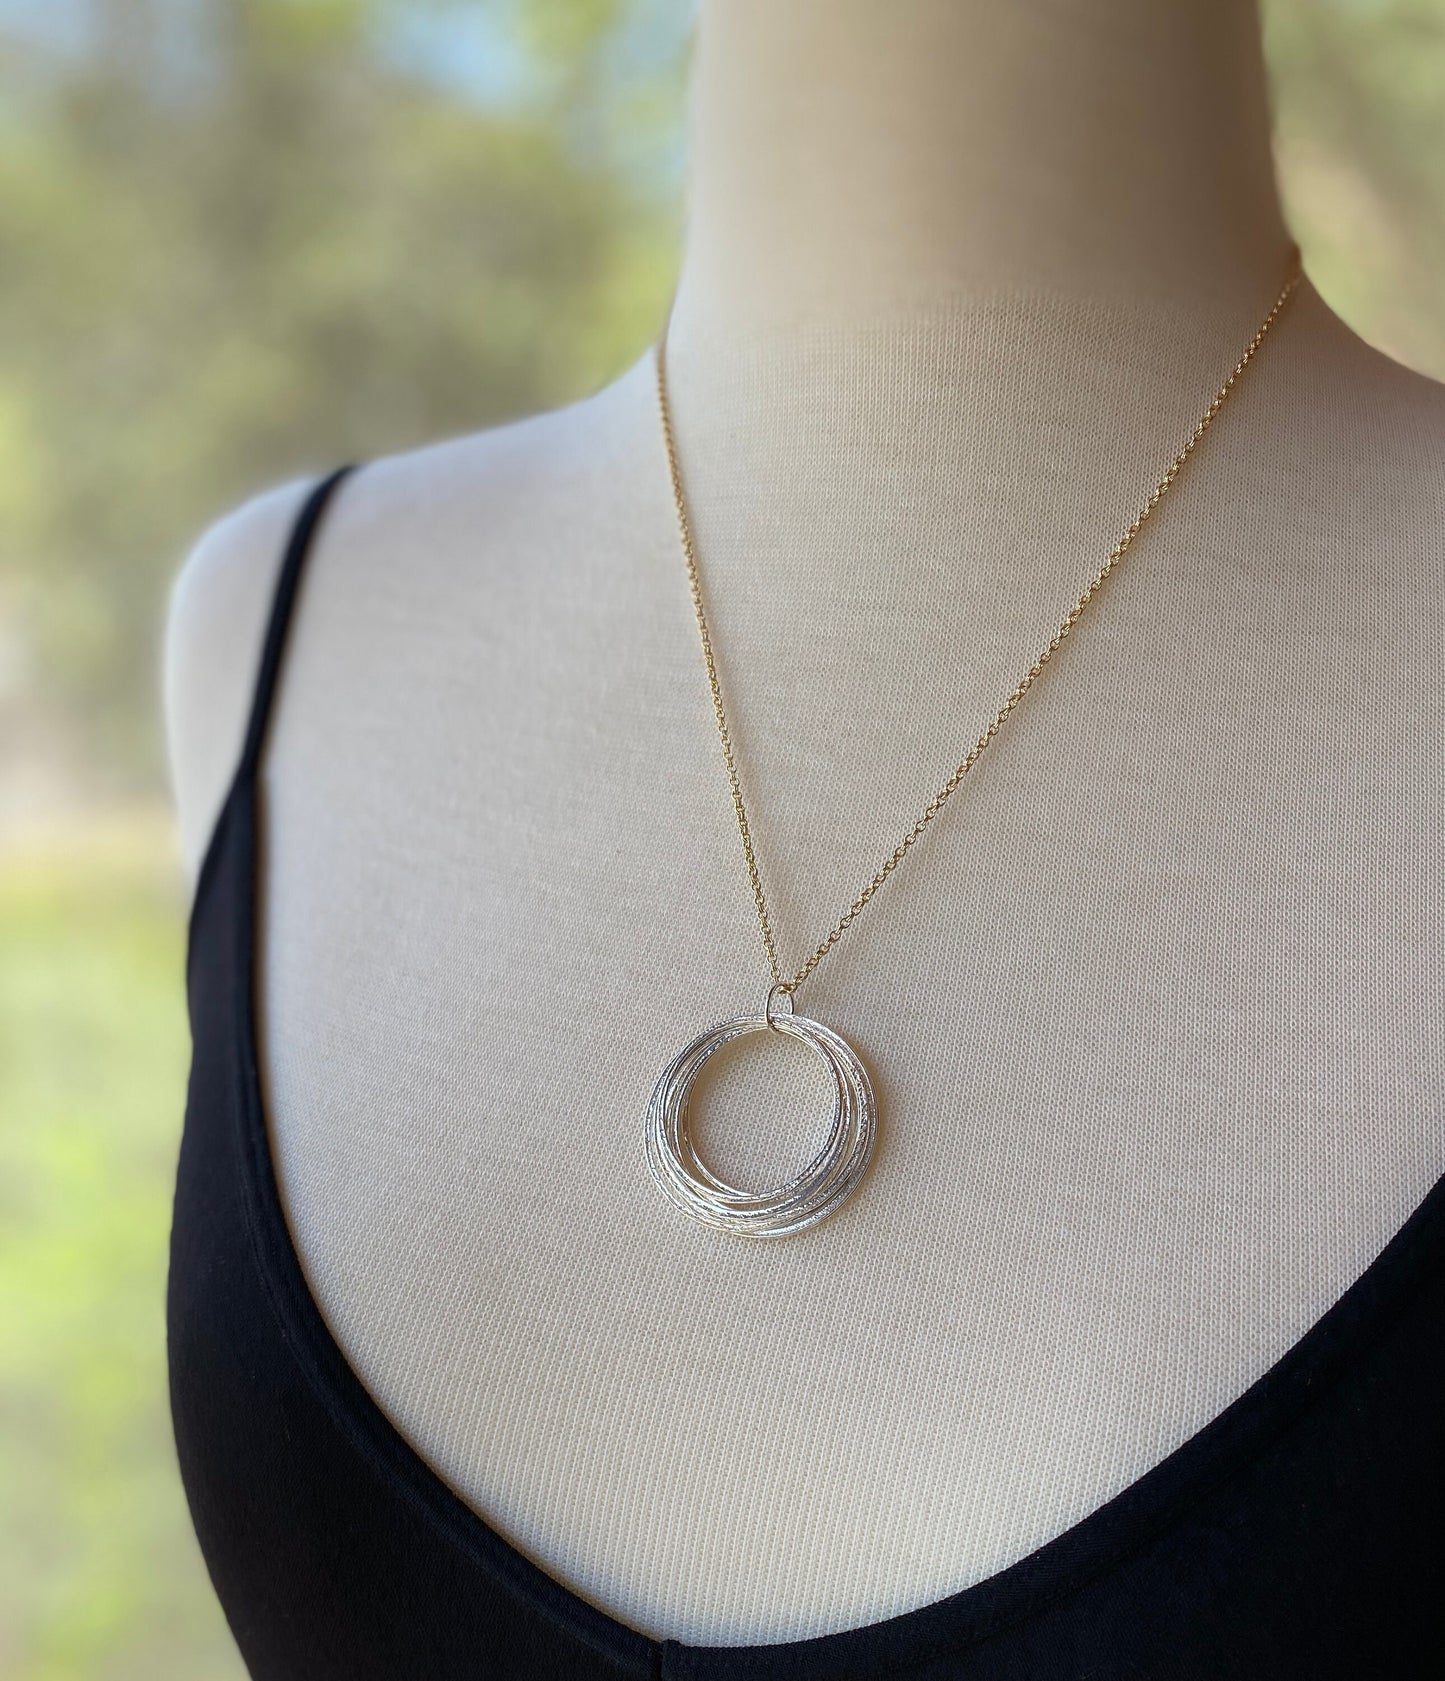 8 Circle 80th Birthday Mixed Metal Milestone Necklace, Handcrafted Bold Sparkly Circles Perfectly Imperfect Pendant on 14K Gold Filled Chain